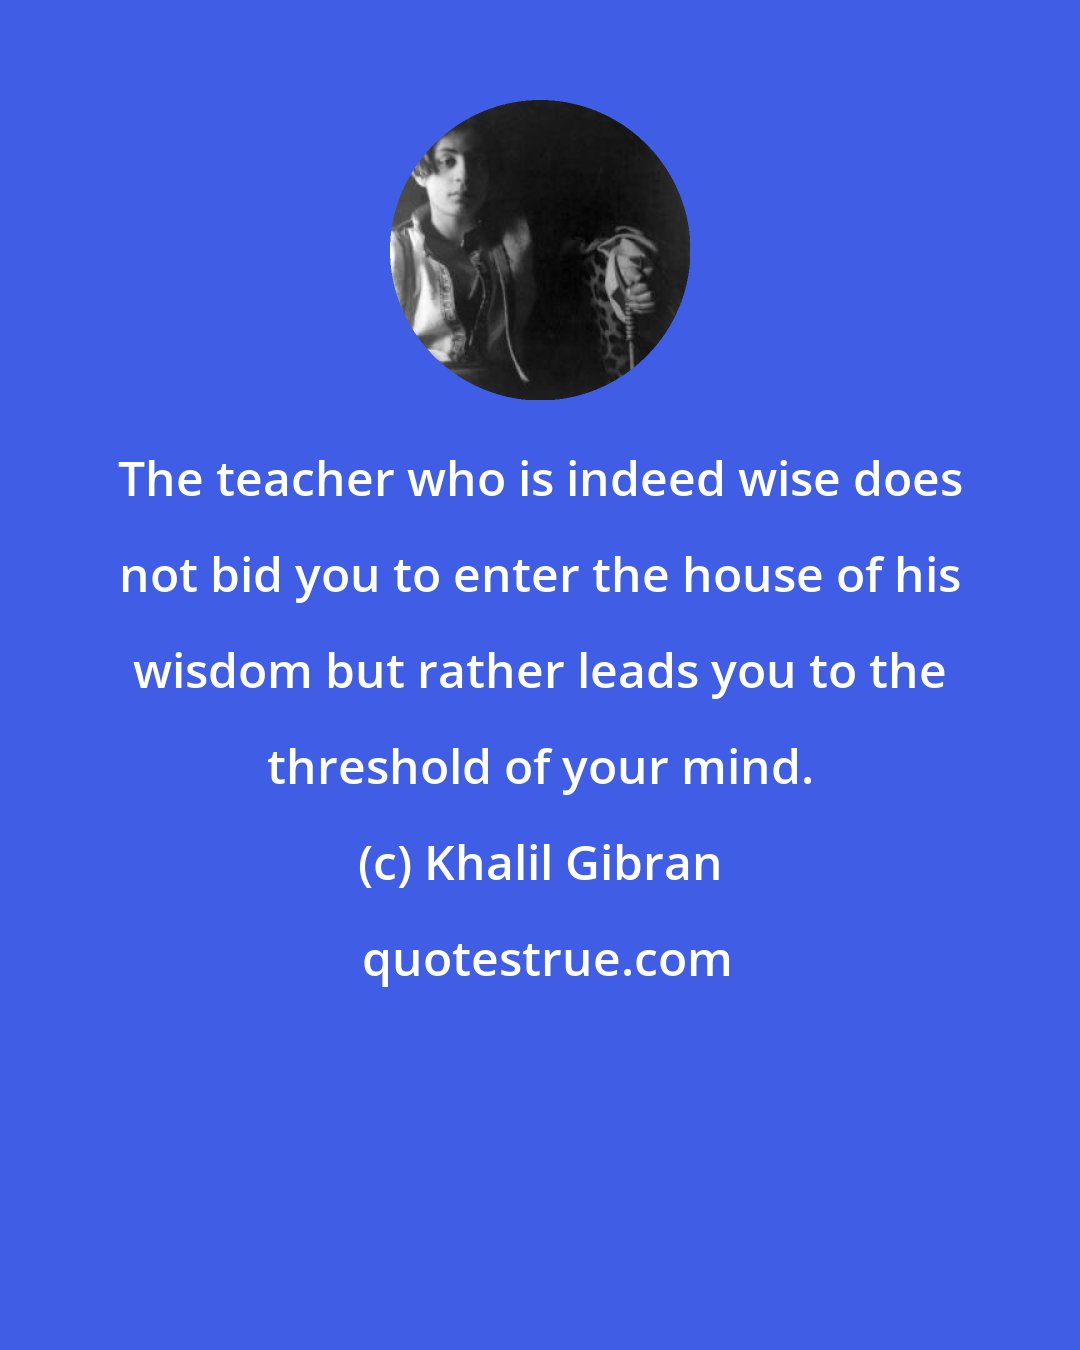 Khalil Gibran: The teacher who is indeed wise does not bid you to enter the house of his wisdom but rather leads you to the threshold of your mind.